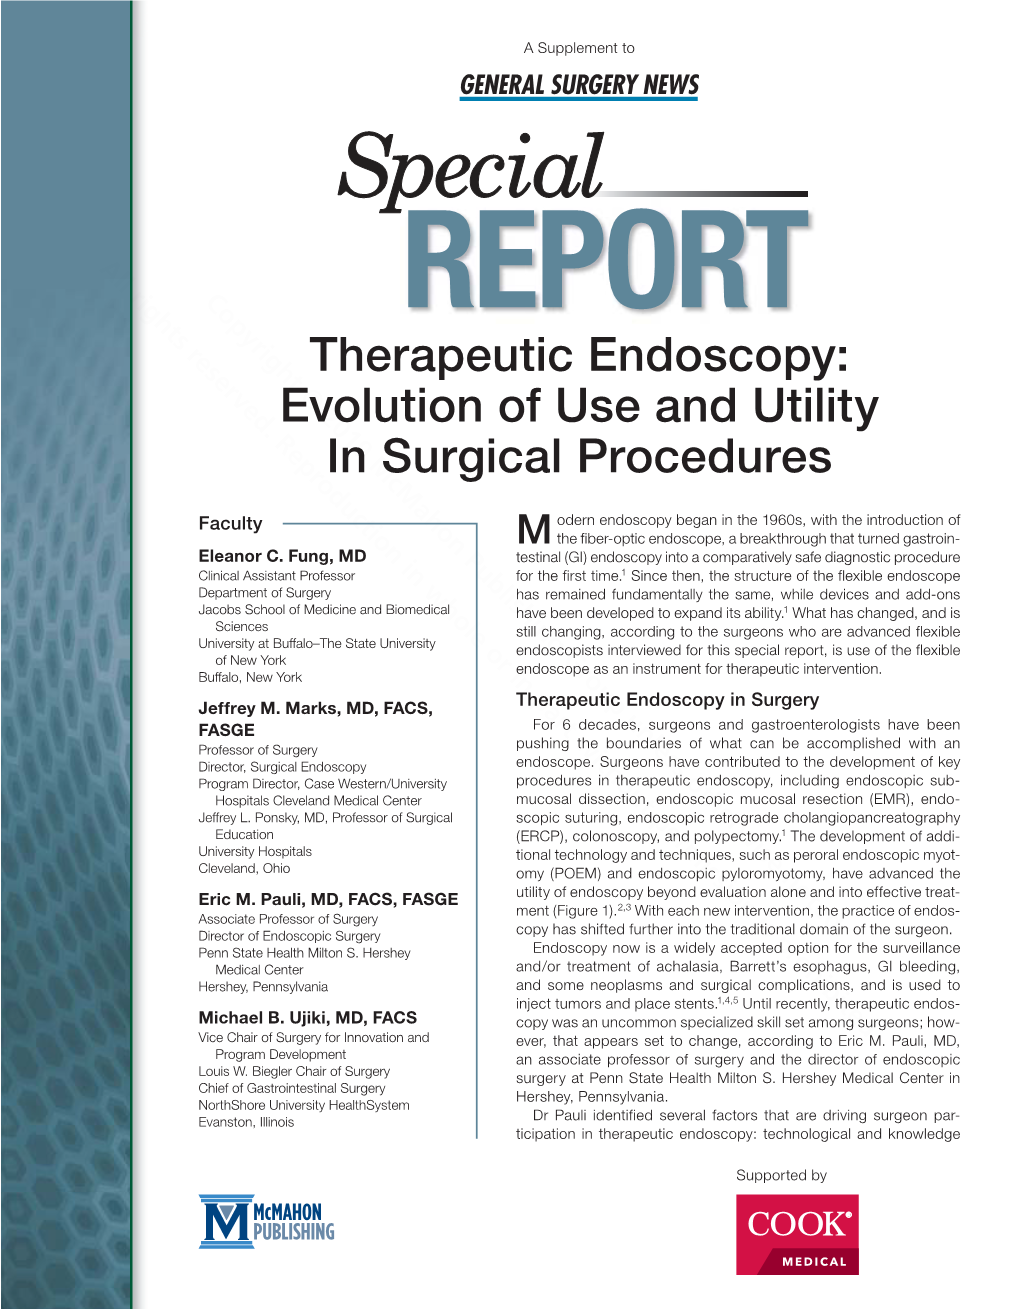 Therapeutic Endoscopy: Evolution of Use and Utility in Surgical Procedures